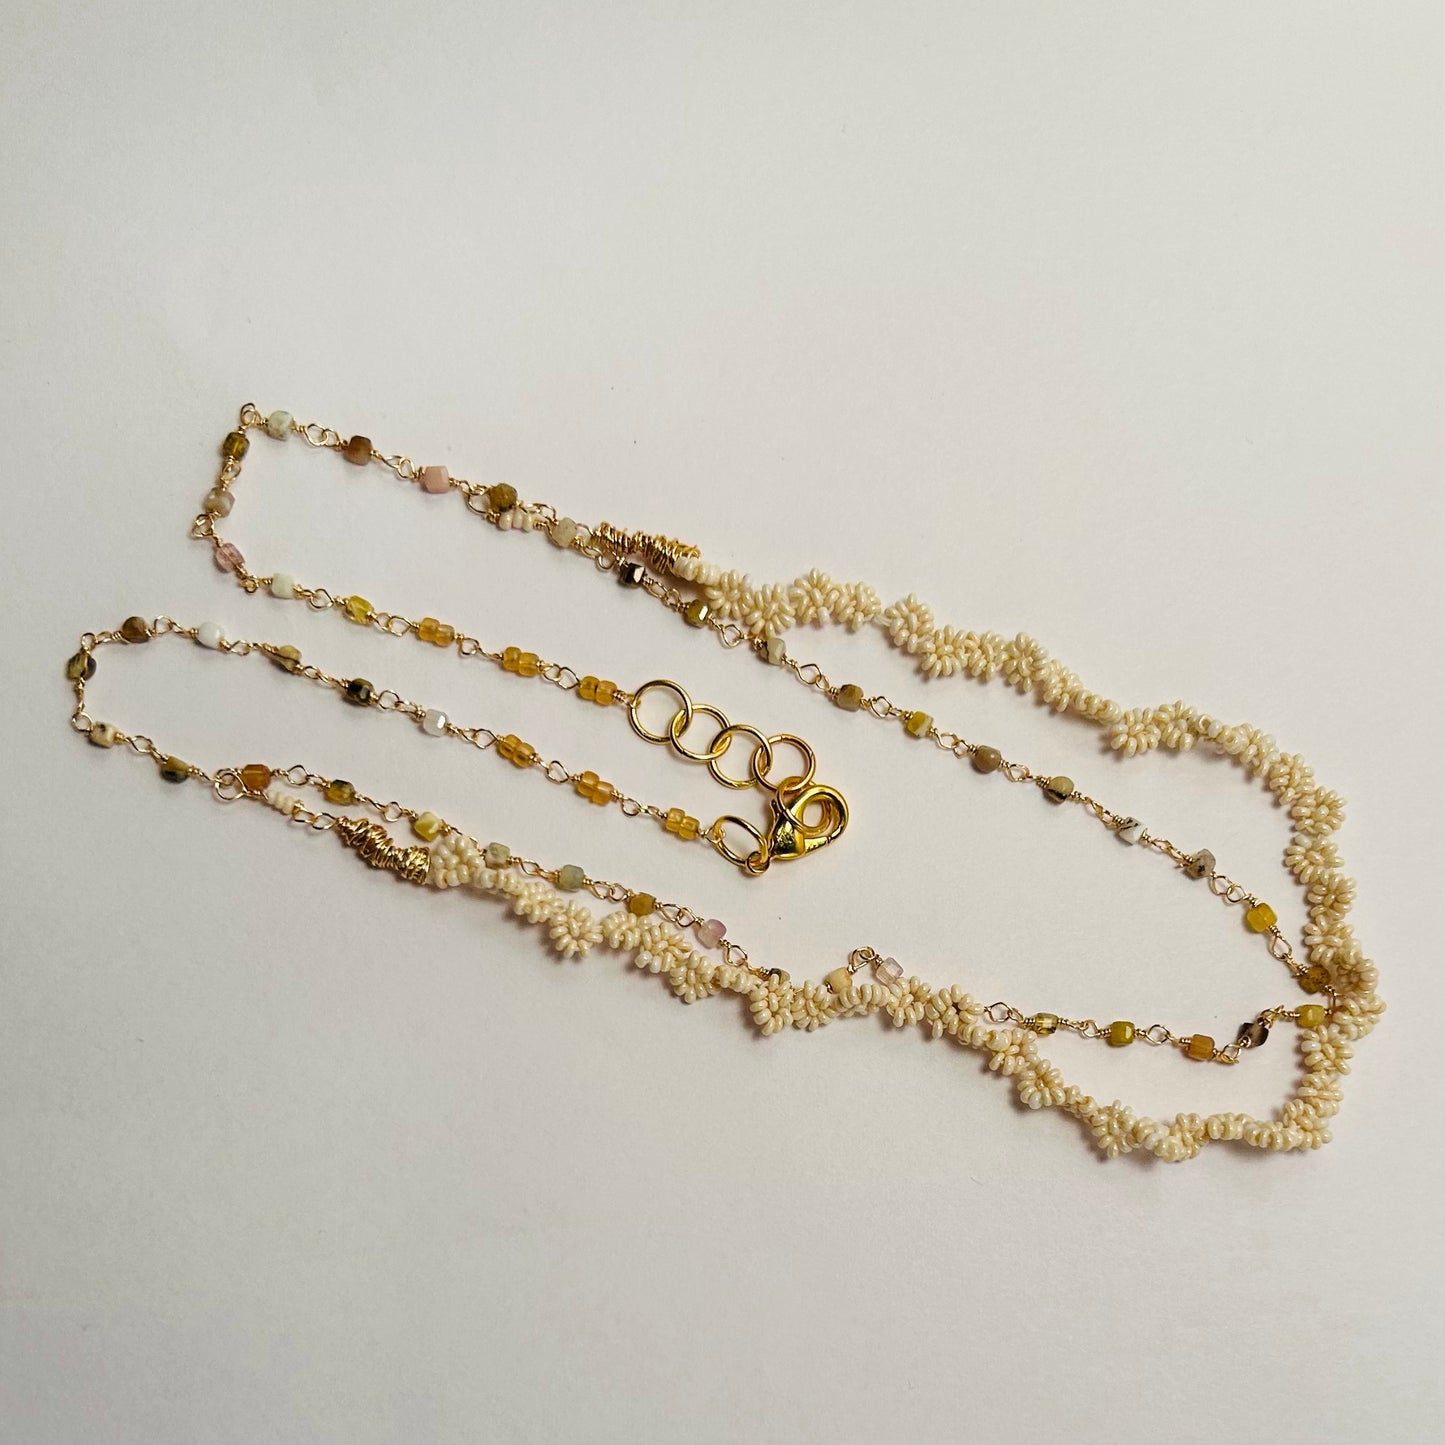 Soft & Sweet, MultiStrand Chain & Stitched Bead Necklace